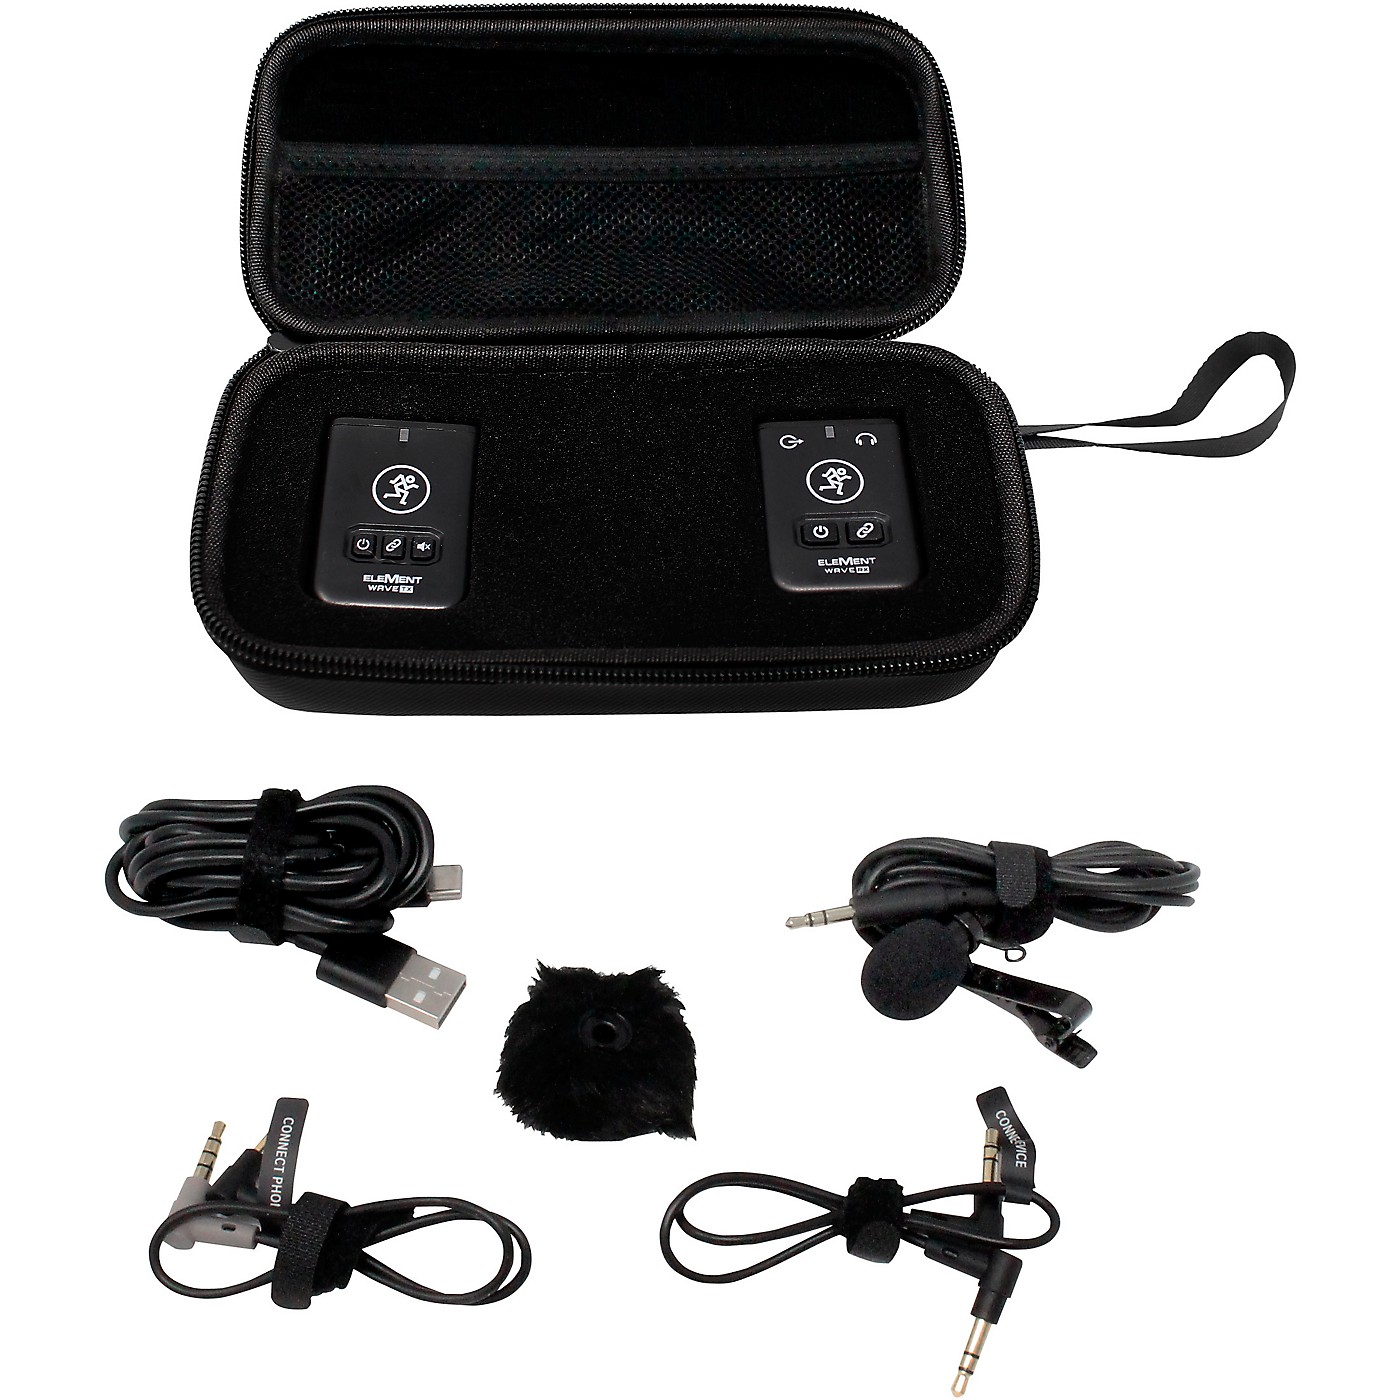 Mackie EleMent Wave LAV Wireless Microphone System thumbnail